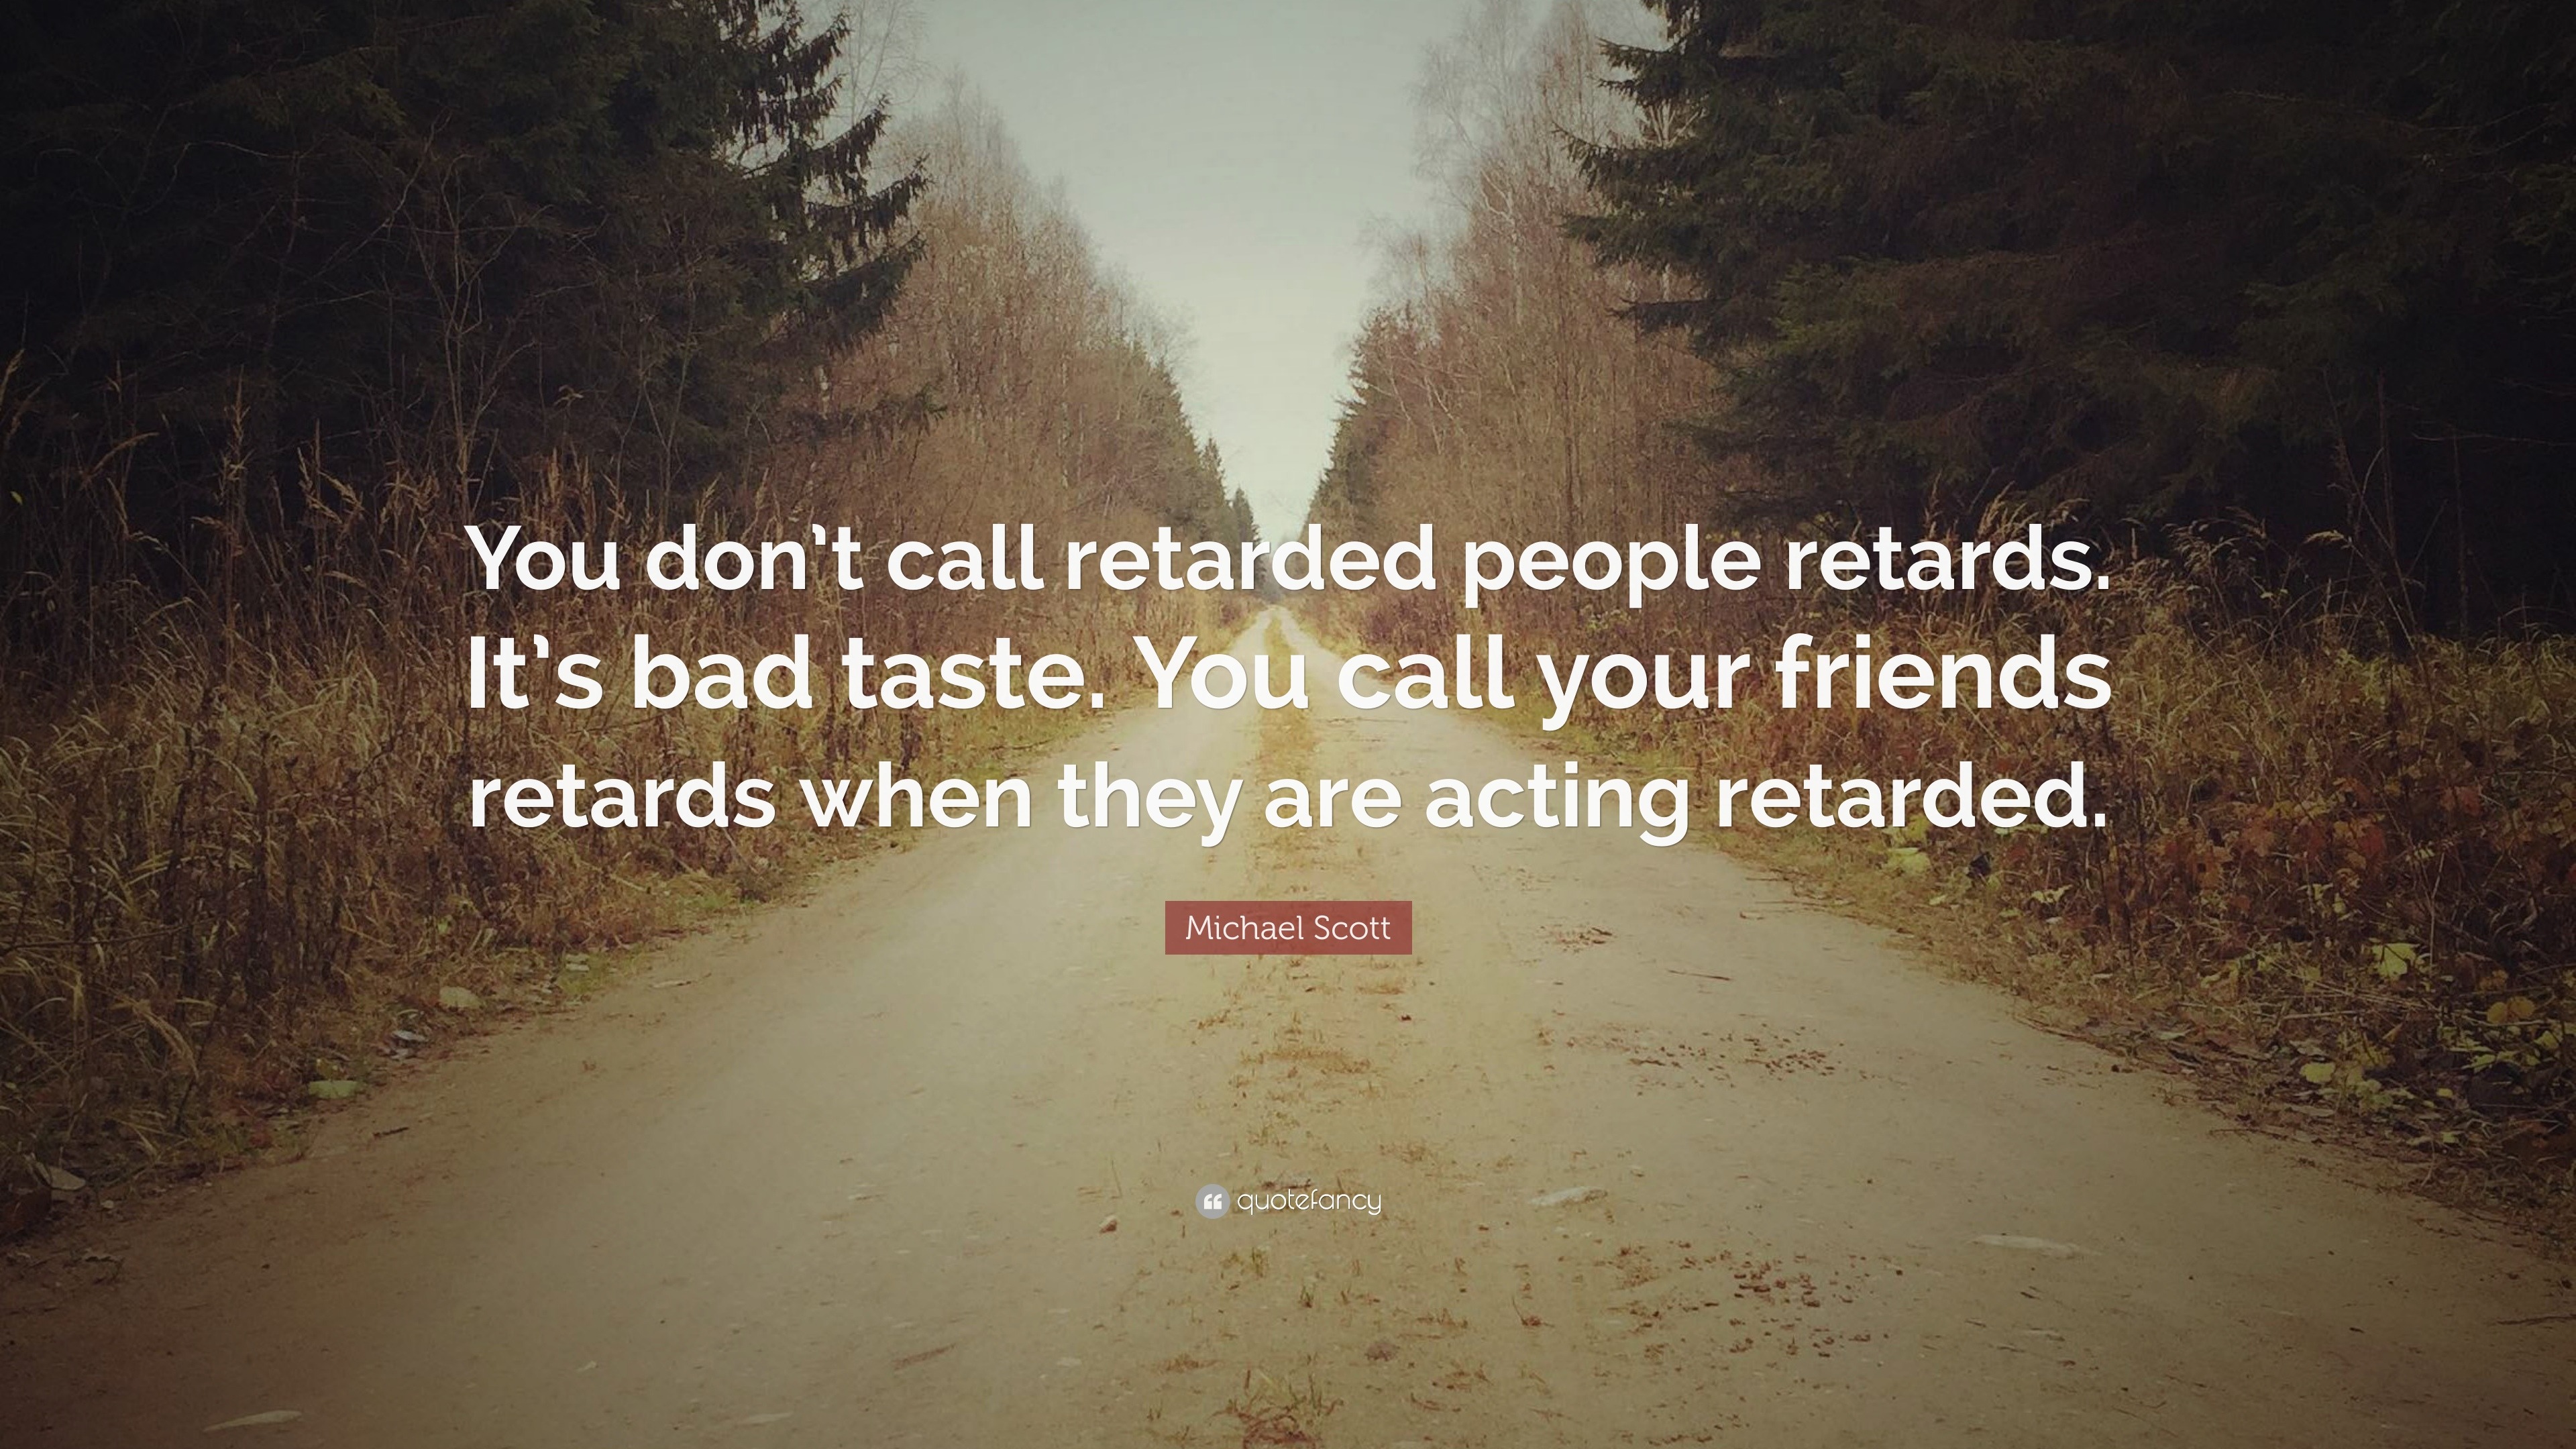 Michael Scott Quote: “You don’t call retarded people retards. It’s bad